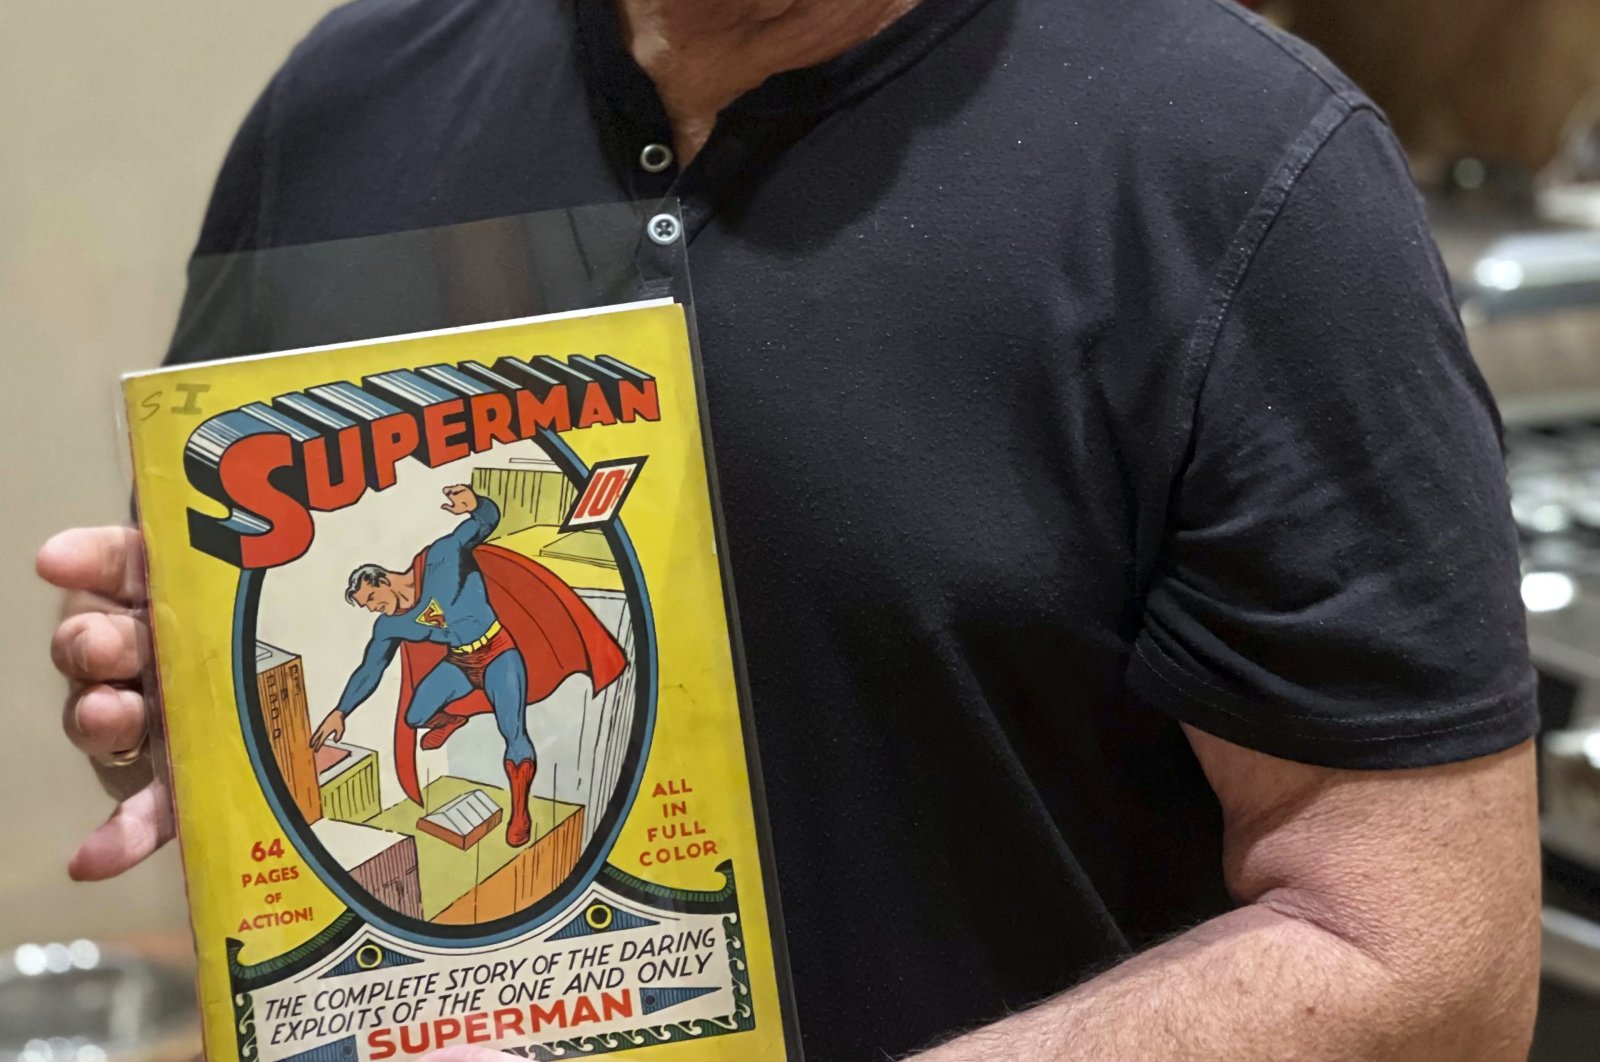 Mark Michaelson holds his rare copy of a Superman #1 comic book that sold on newsstands for a dime in 1939 in this undated photo. (Sara Michaelson/Mark Michaelson via AP)